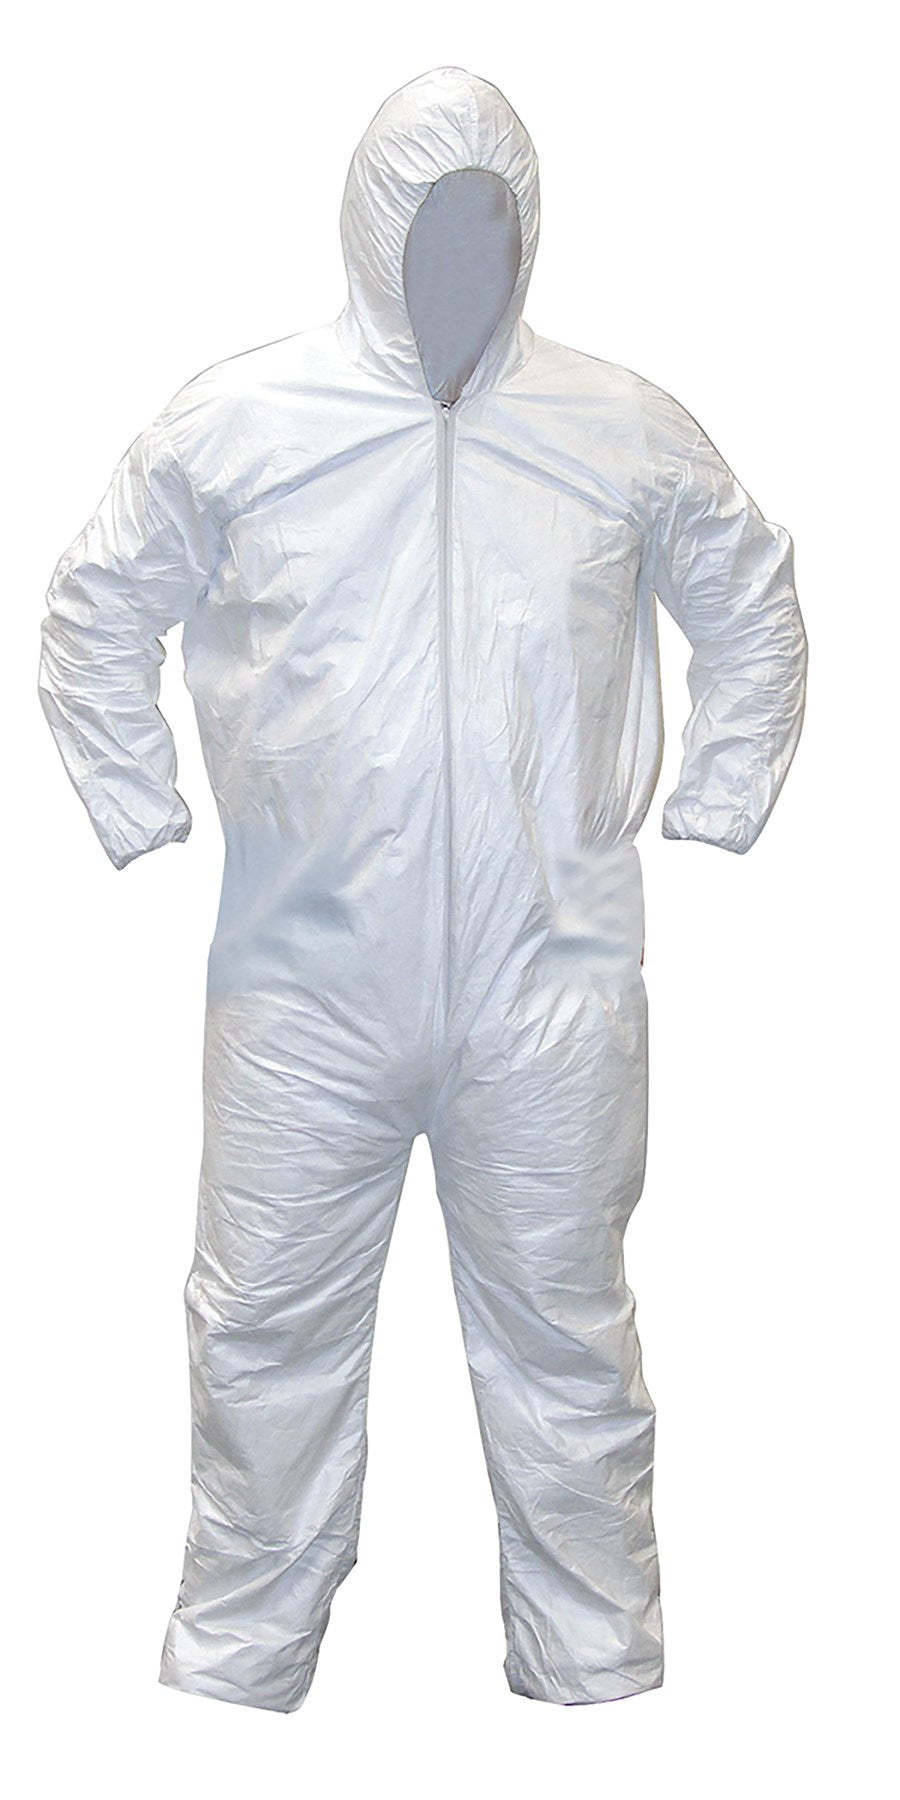 SAS Safety Corporation, Sas Safety Corporation 6894 Extra-Large Gen-Nex™ All-Purpose Hooded Coveralls